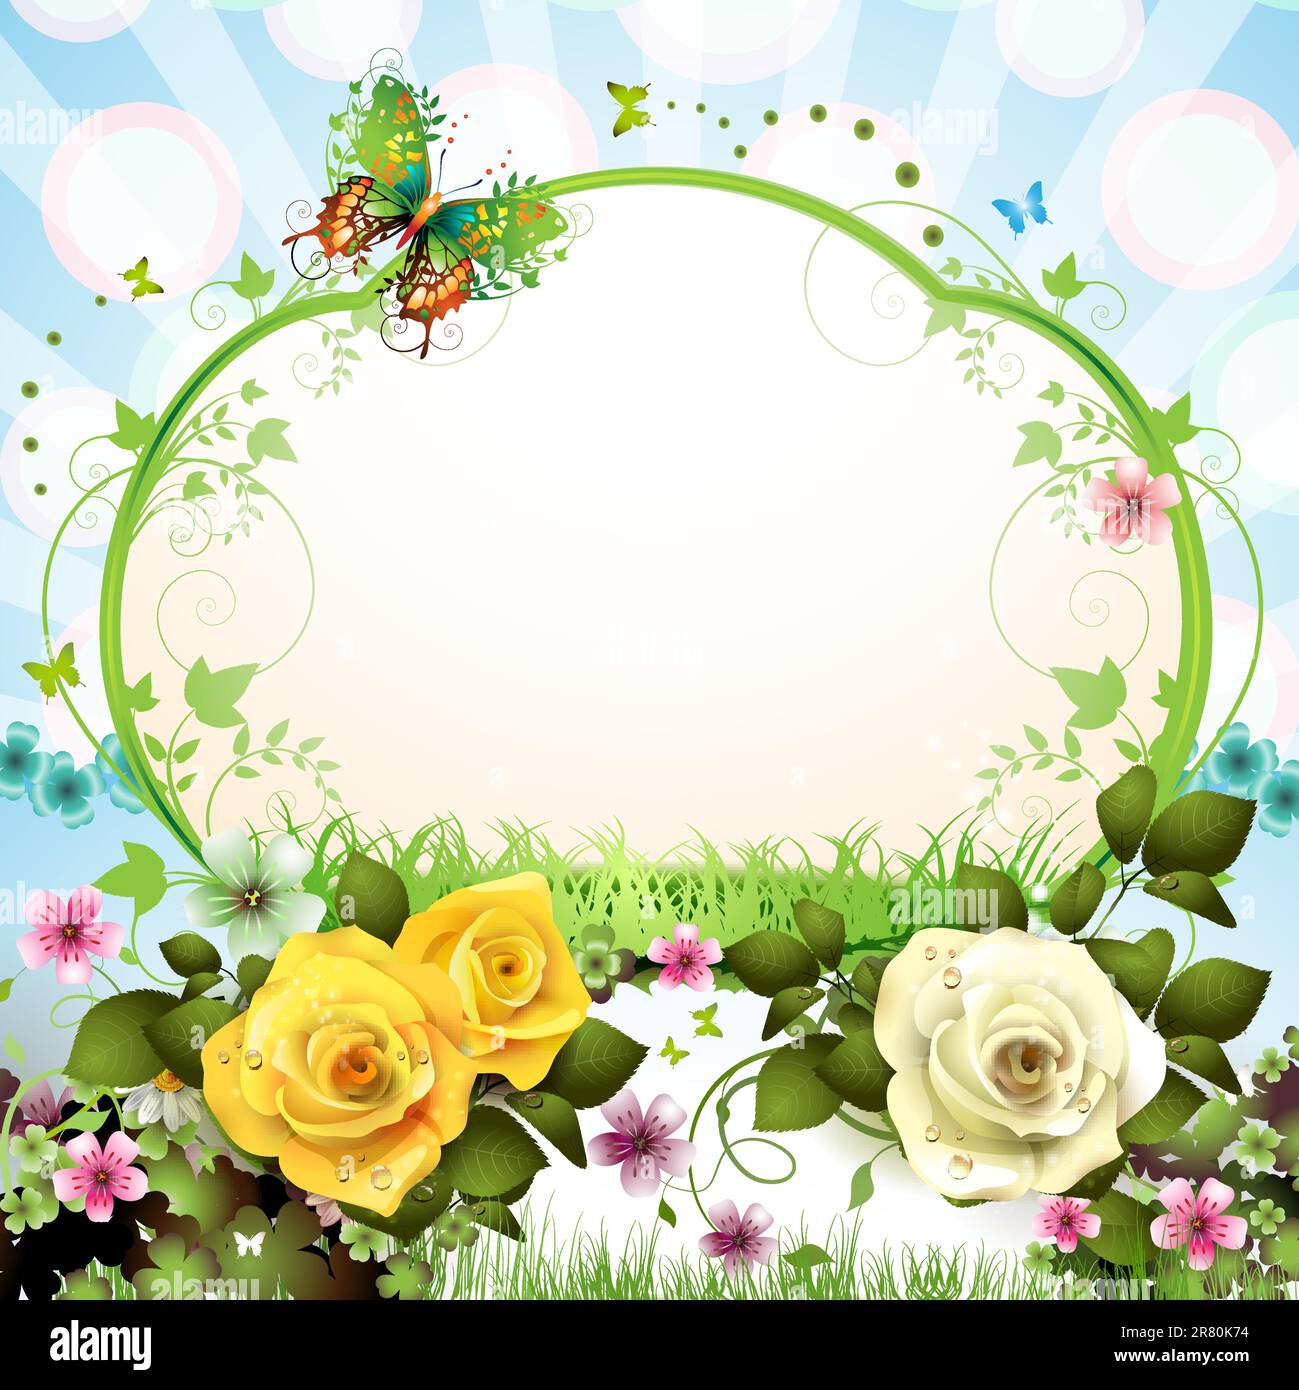 Springtime background with butterflies and roses Stock Vector